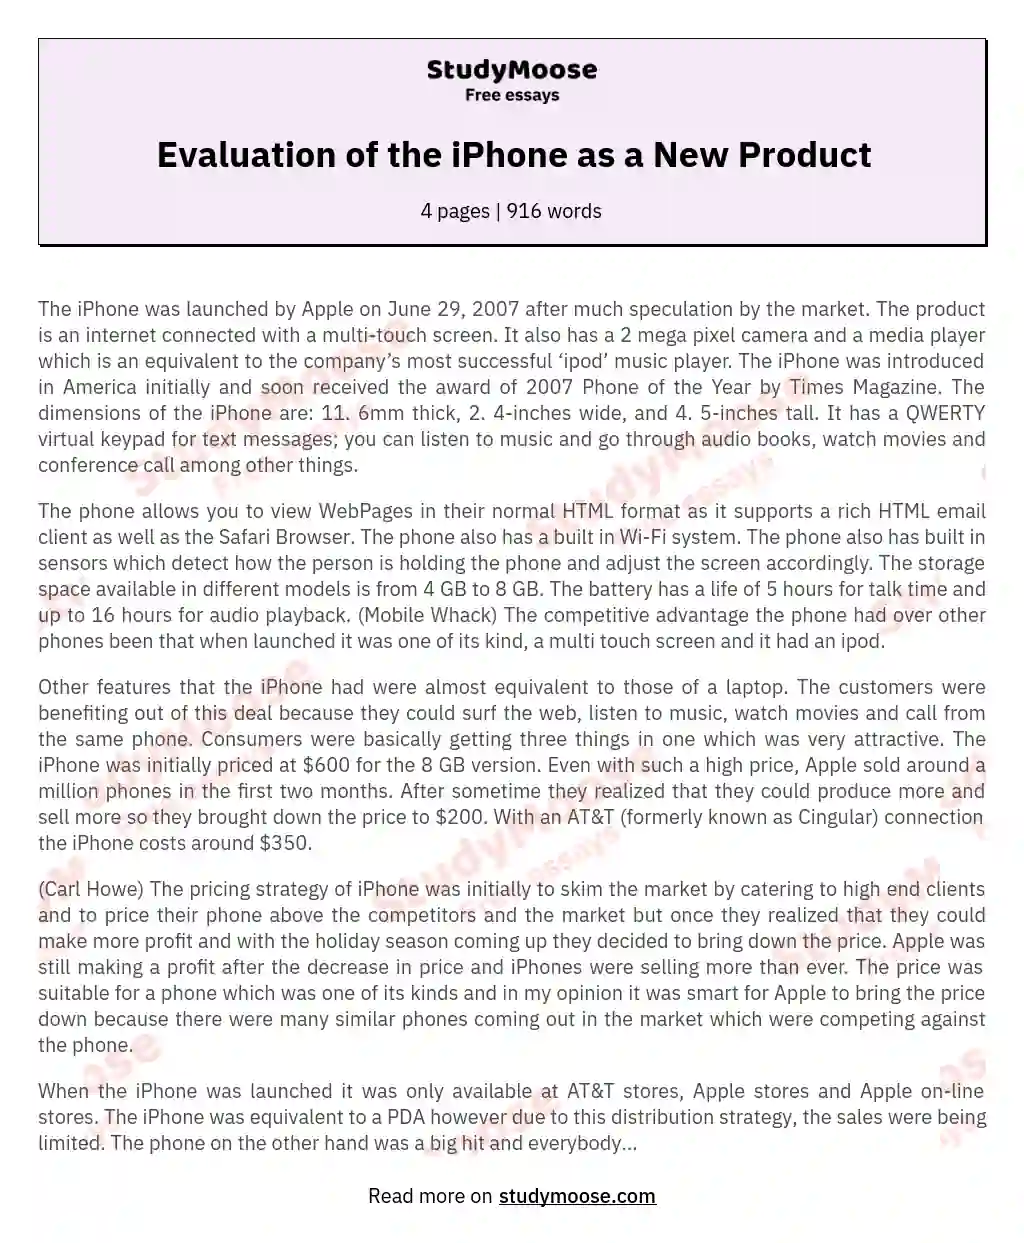 Evaluation of the iPhone as a New Product essay